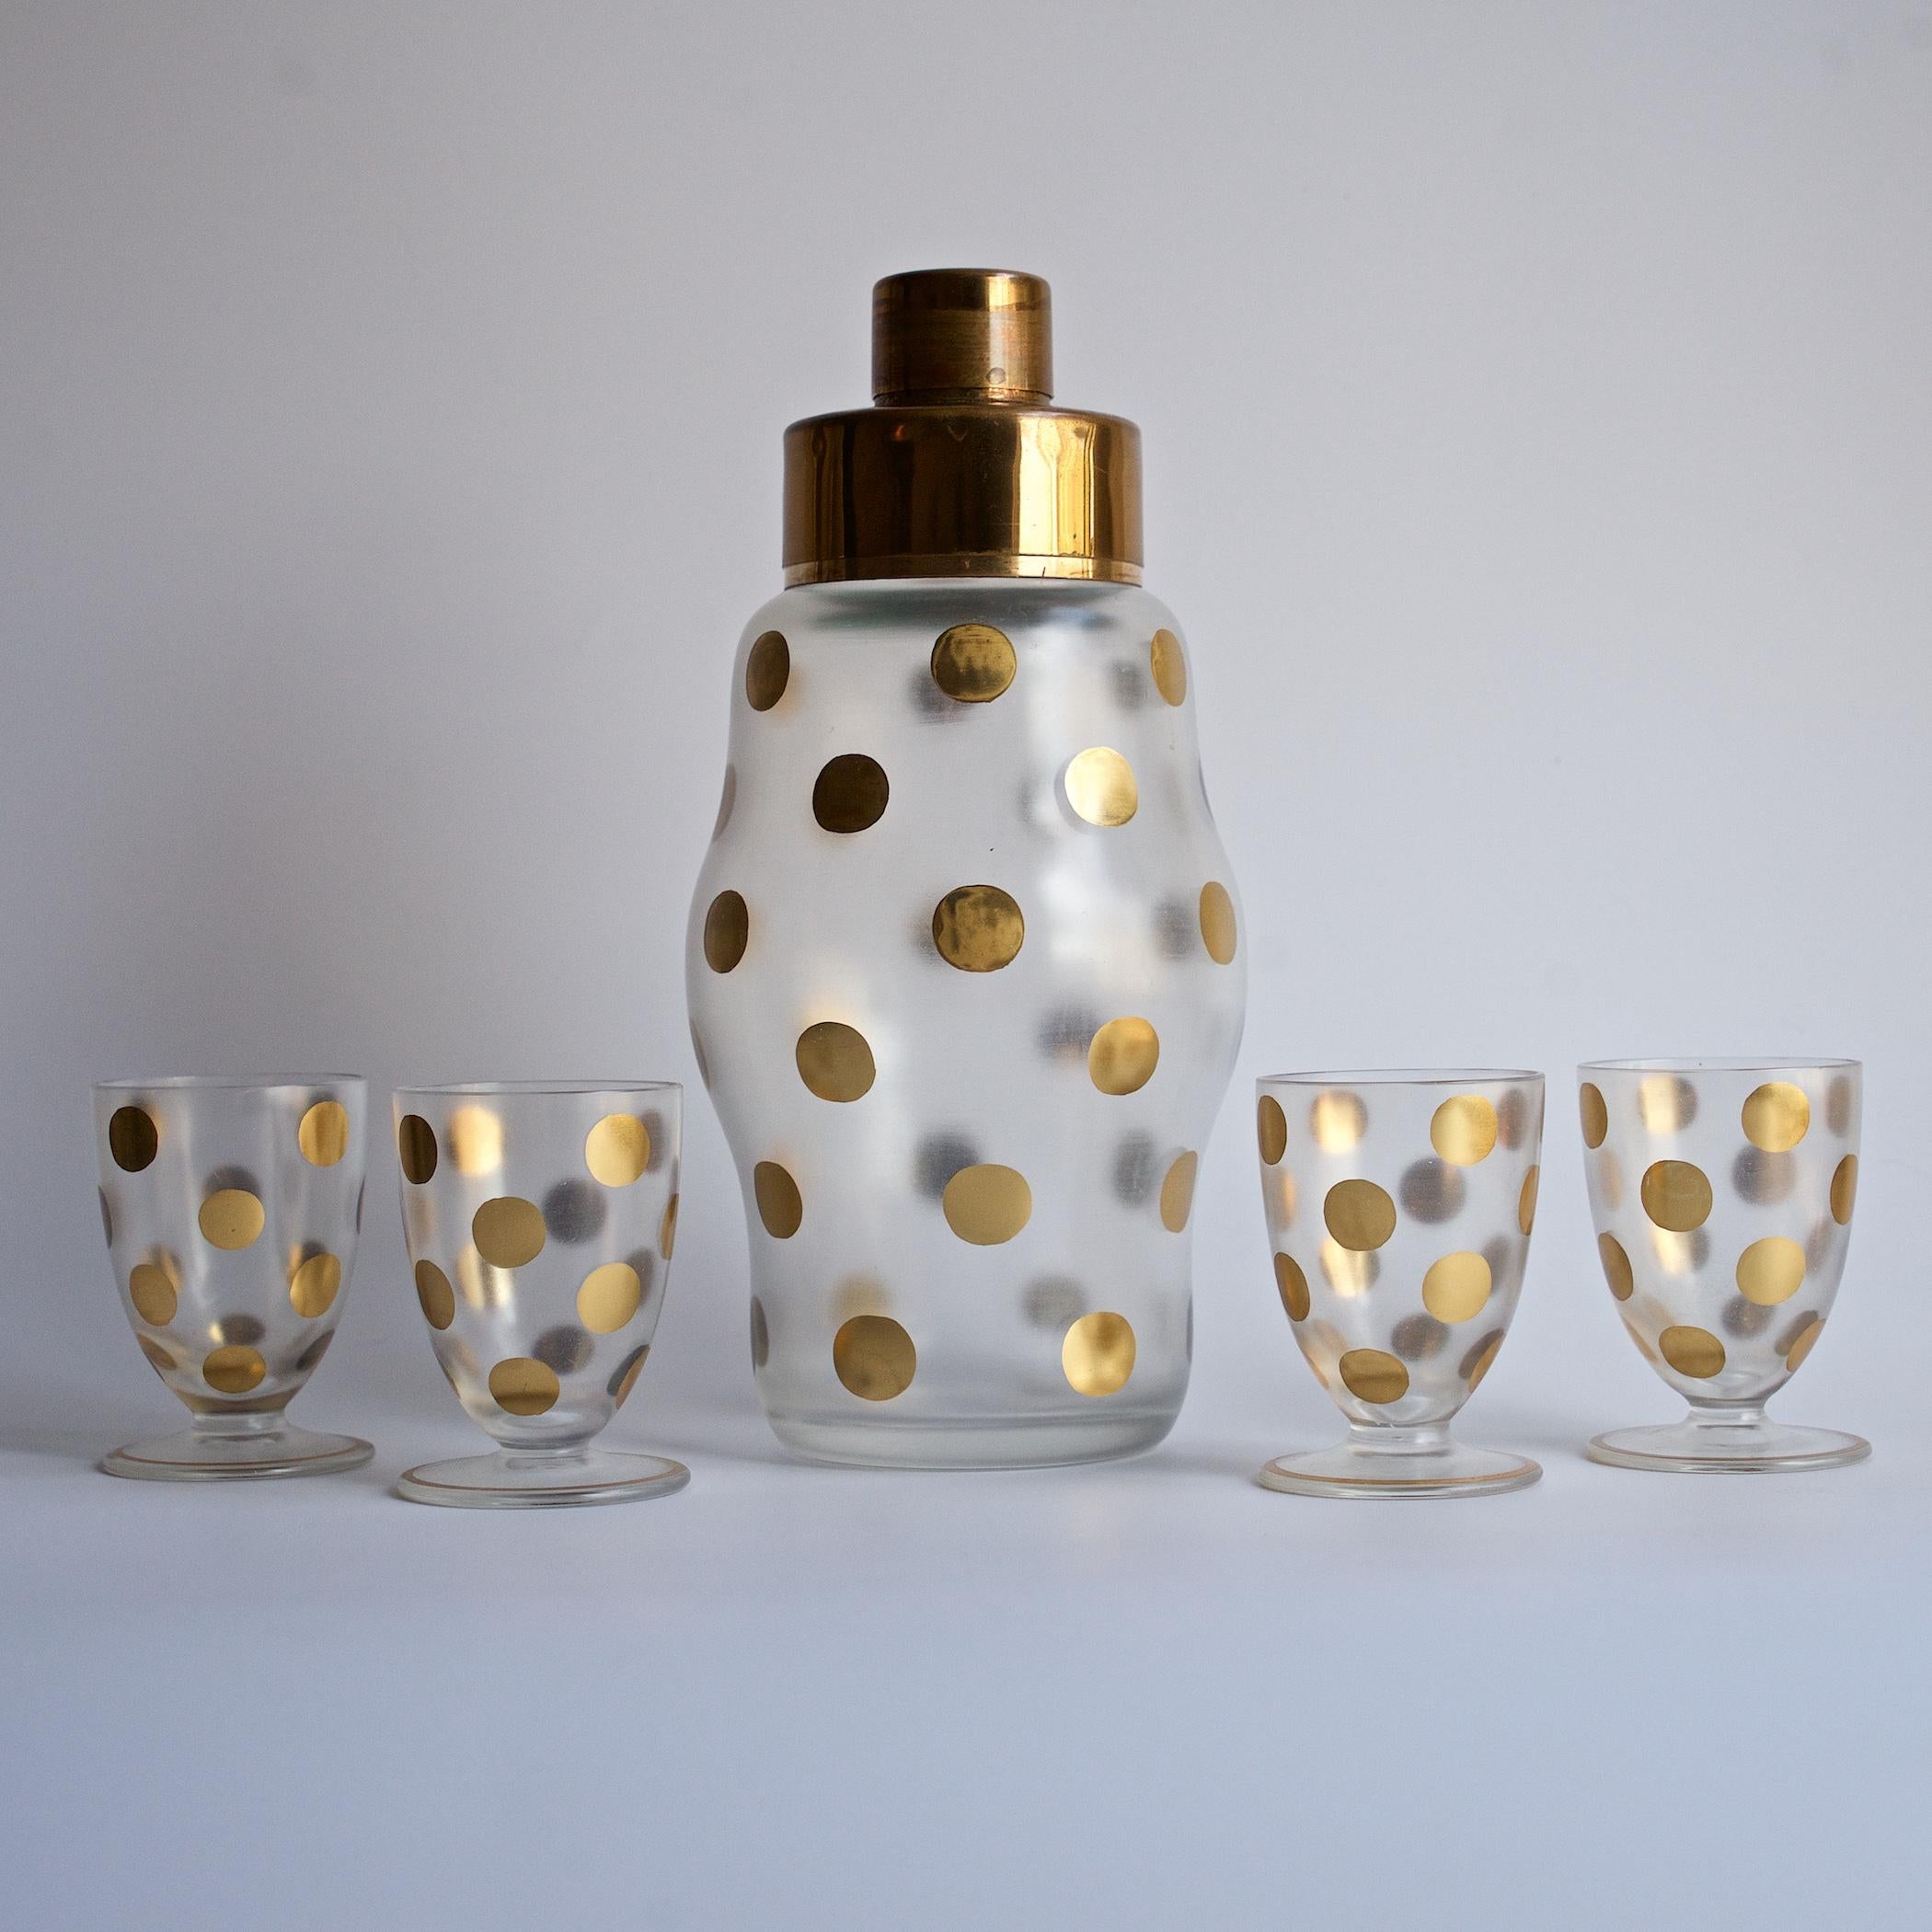 An early 20th century Luxurious Art Deco Era design. Wonderful translucent acid etched satin exterior with painted gold polkadots. Contents Included; a mixer, with 2-piece lid, and 4 matching footed demitasse glass. No chips, No cracks. Some